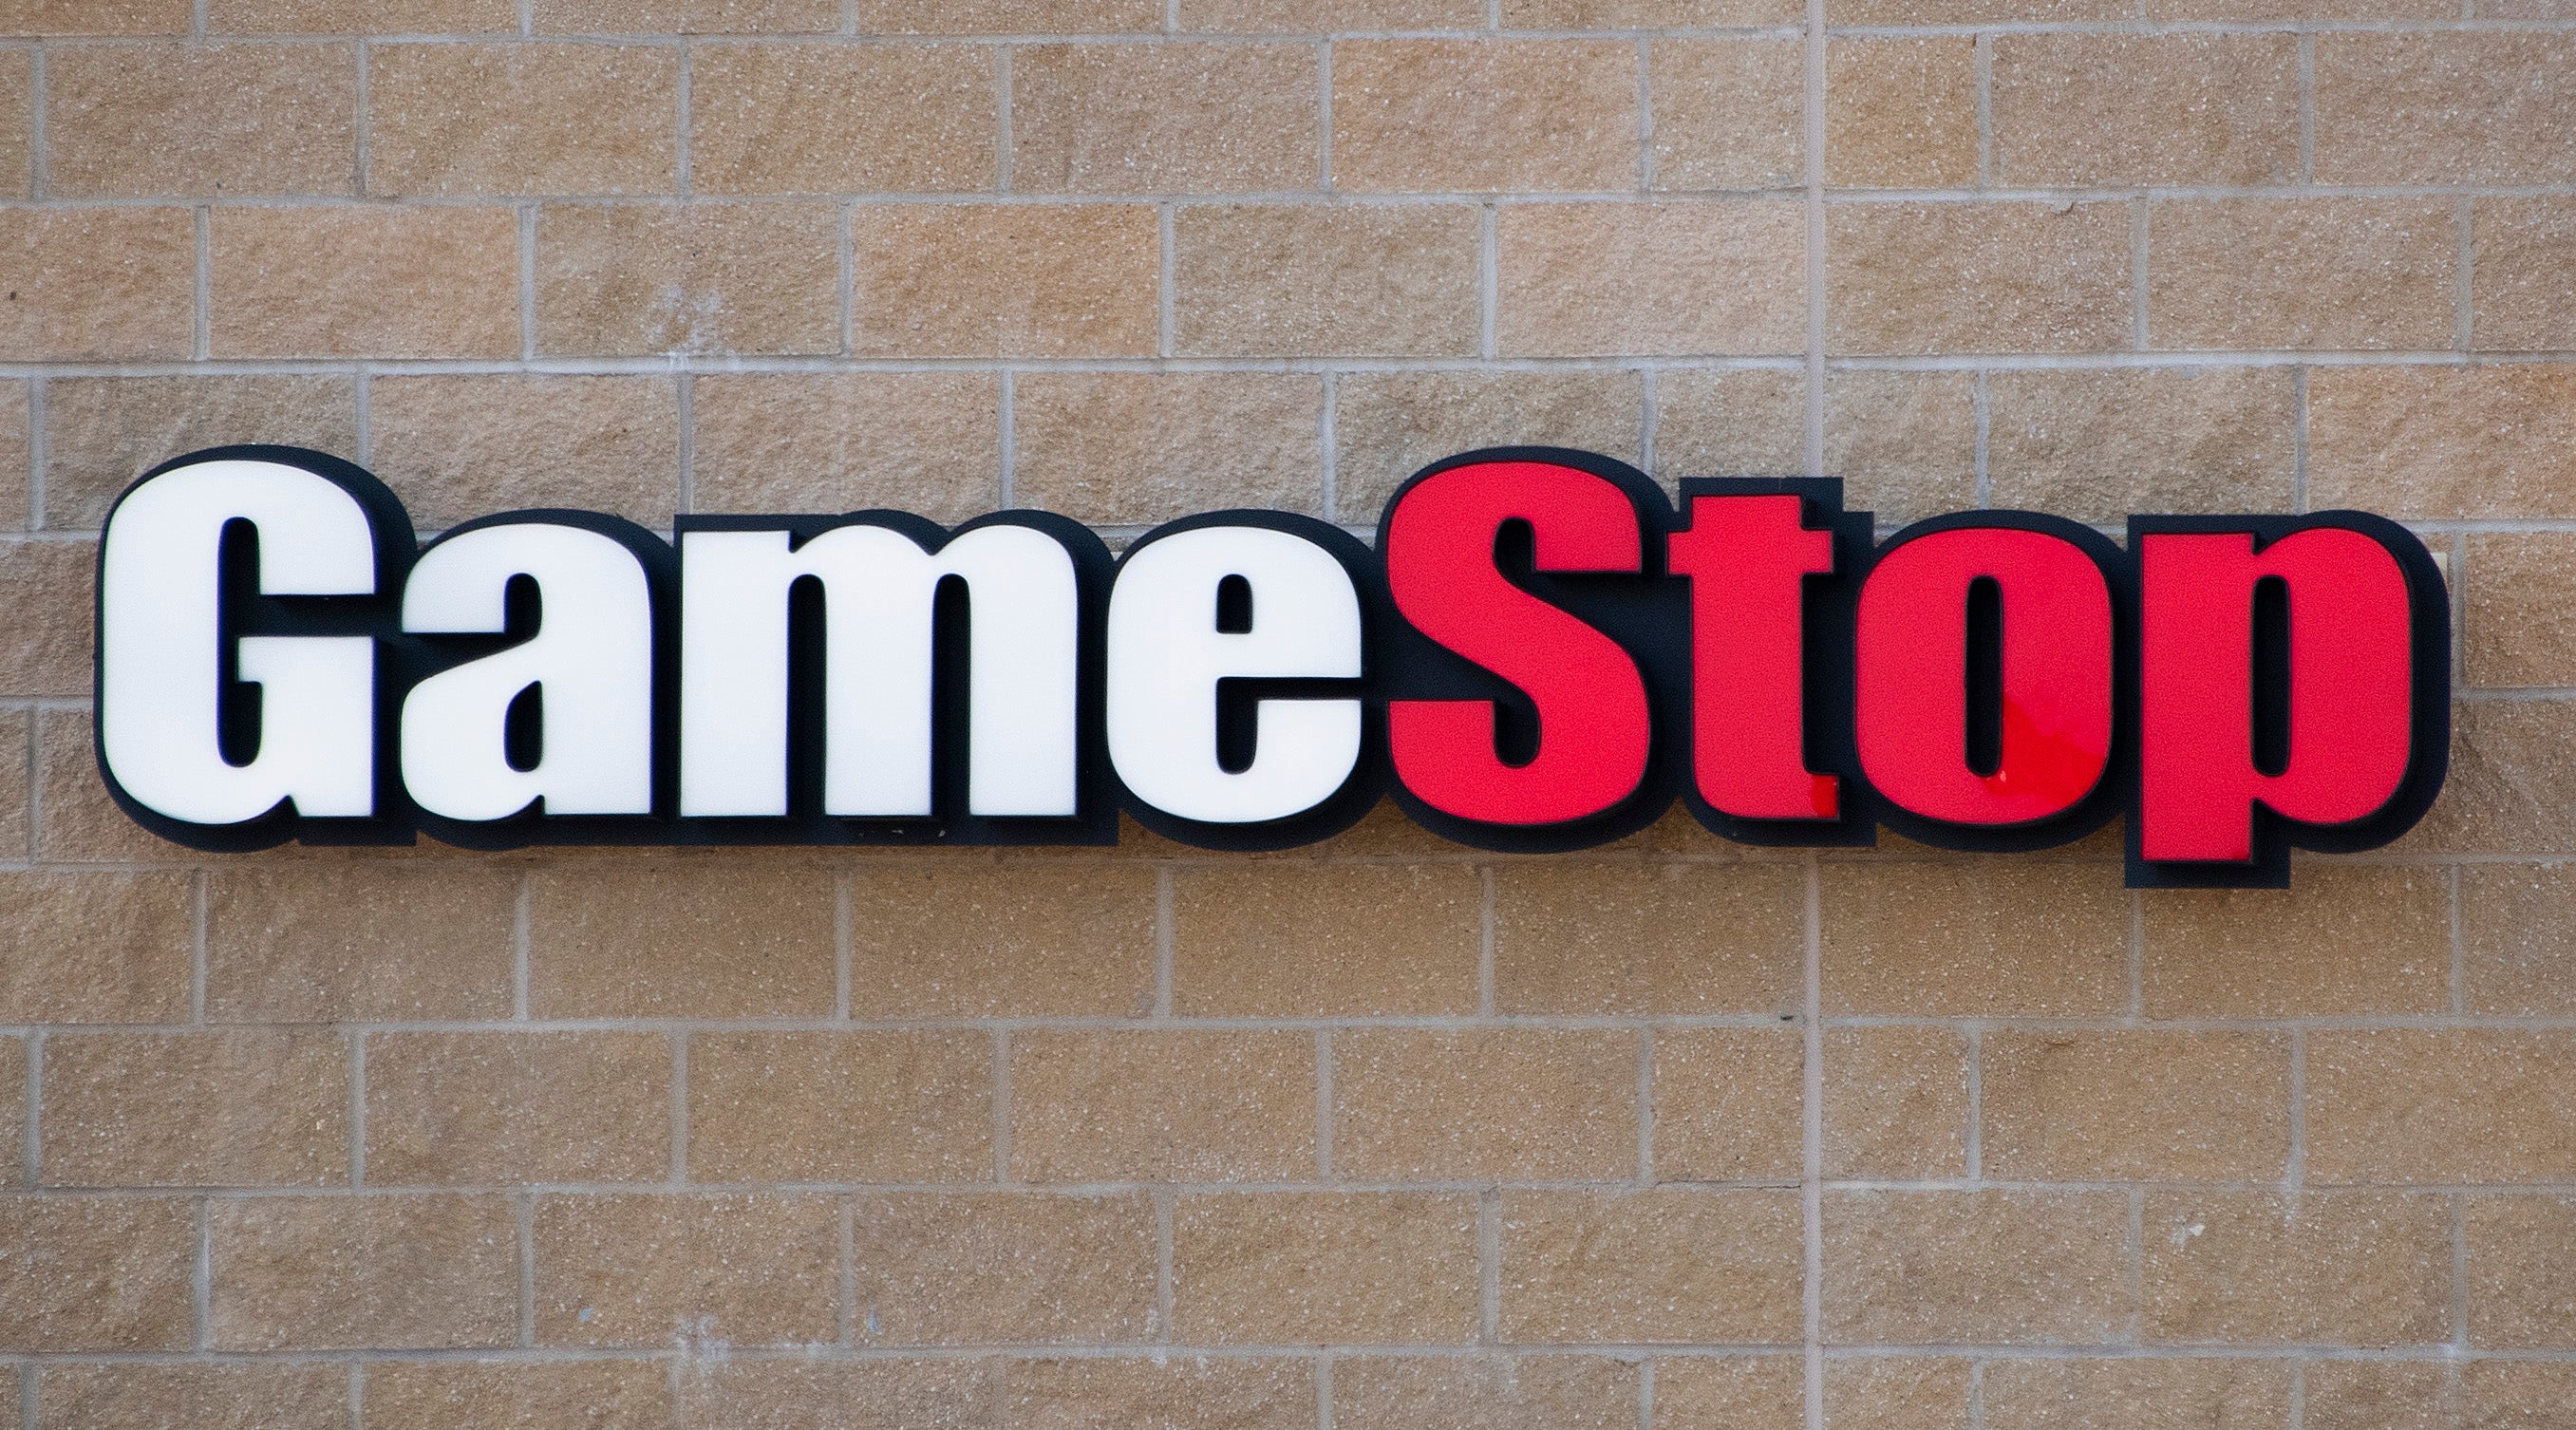 10-year-old makes thousands on GameStop shares he received for Kwanzaa